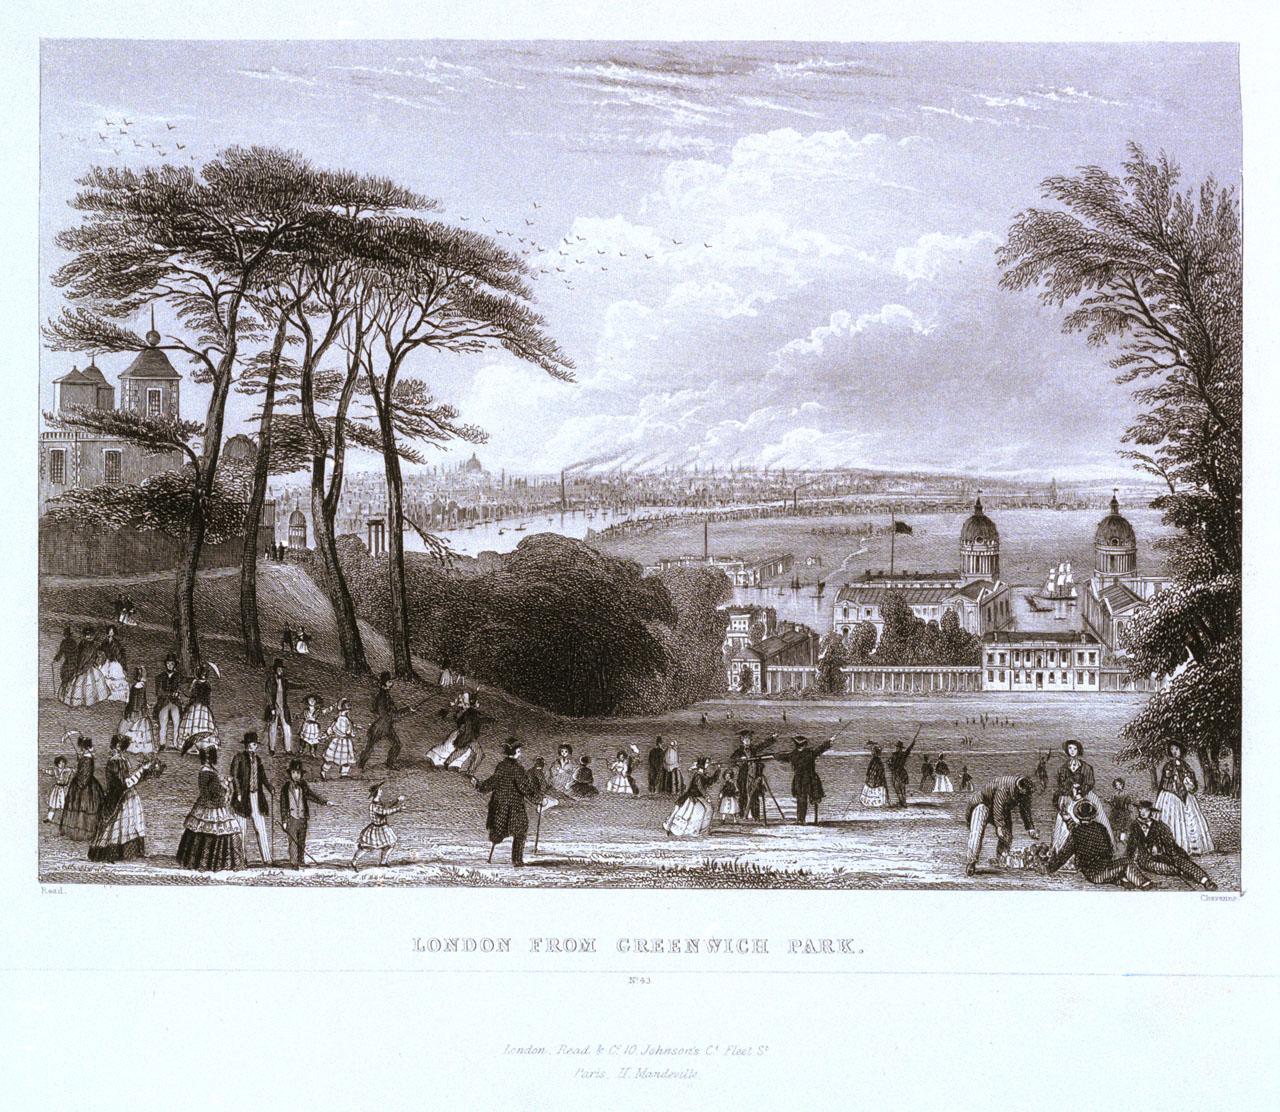 Drawing of the London from Greenwich Park, with the Royal Observatory facing away on the left hand side, and the park sloping down to the Queen's House. Beyond are green fields. Many people are walking around or lounging in the park